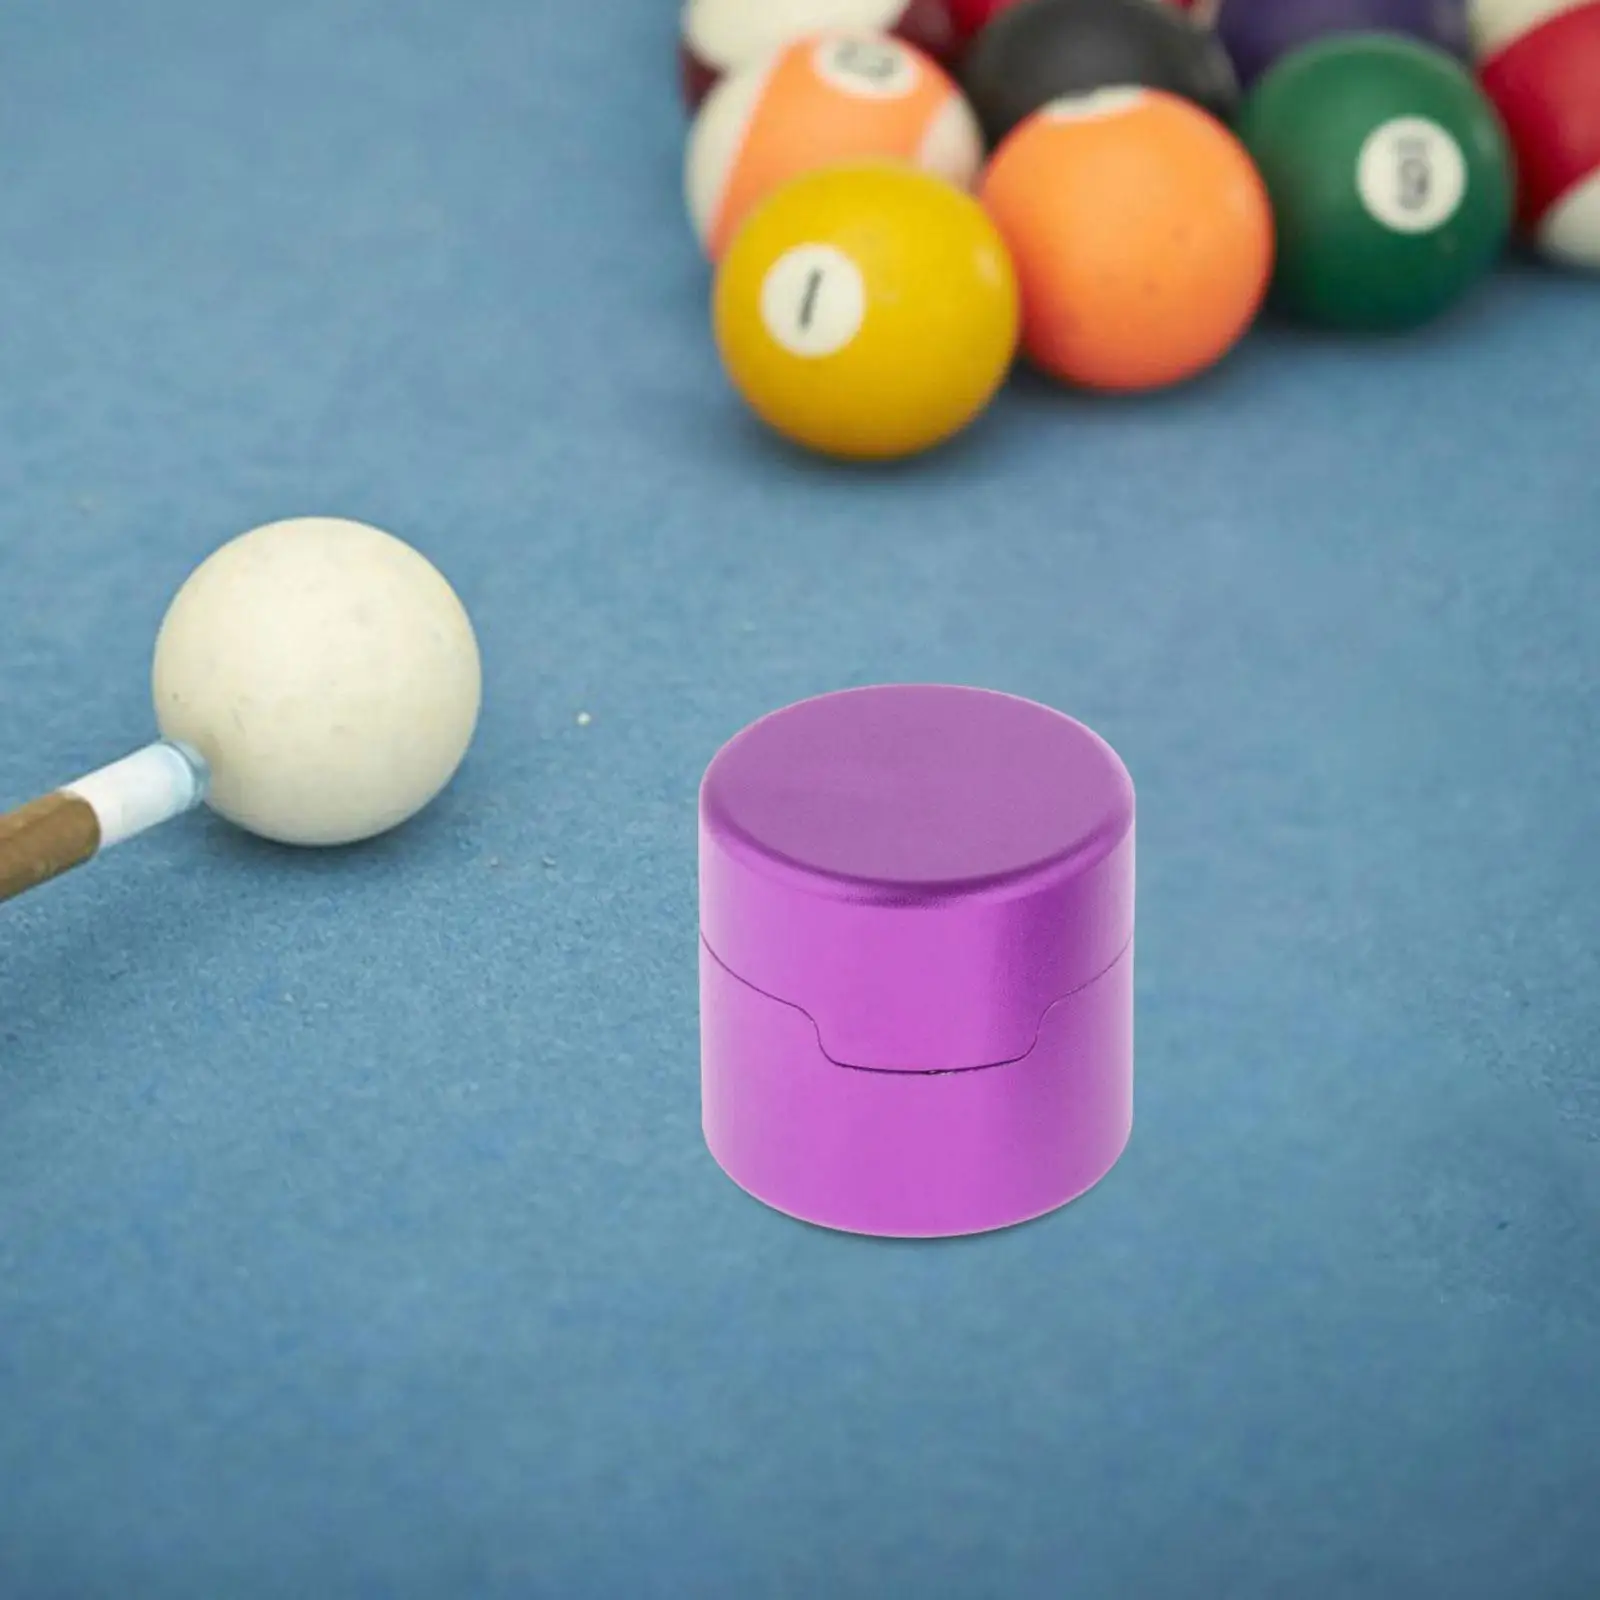 Pool Cue Chalk Holder Round Shaped Cup Box Carrier Case Easy to Use Mini Container Organizer Aluminum Alloy Snooker Accessories